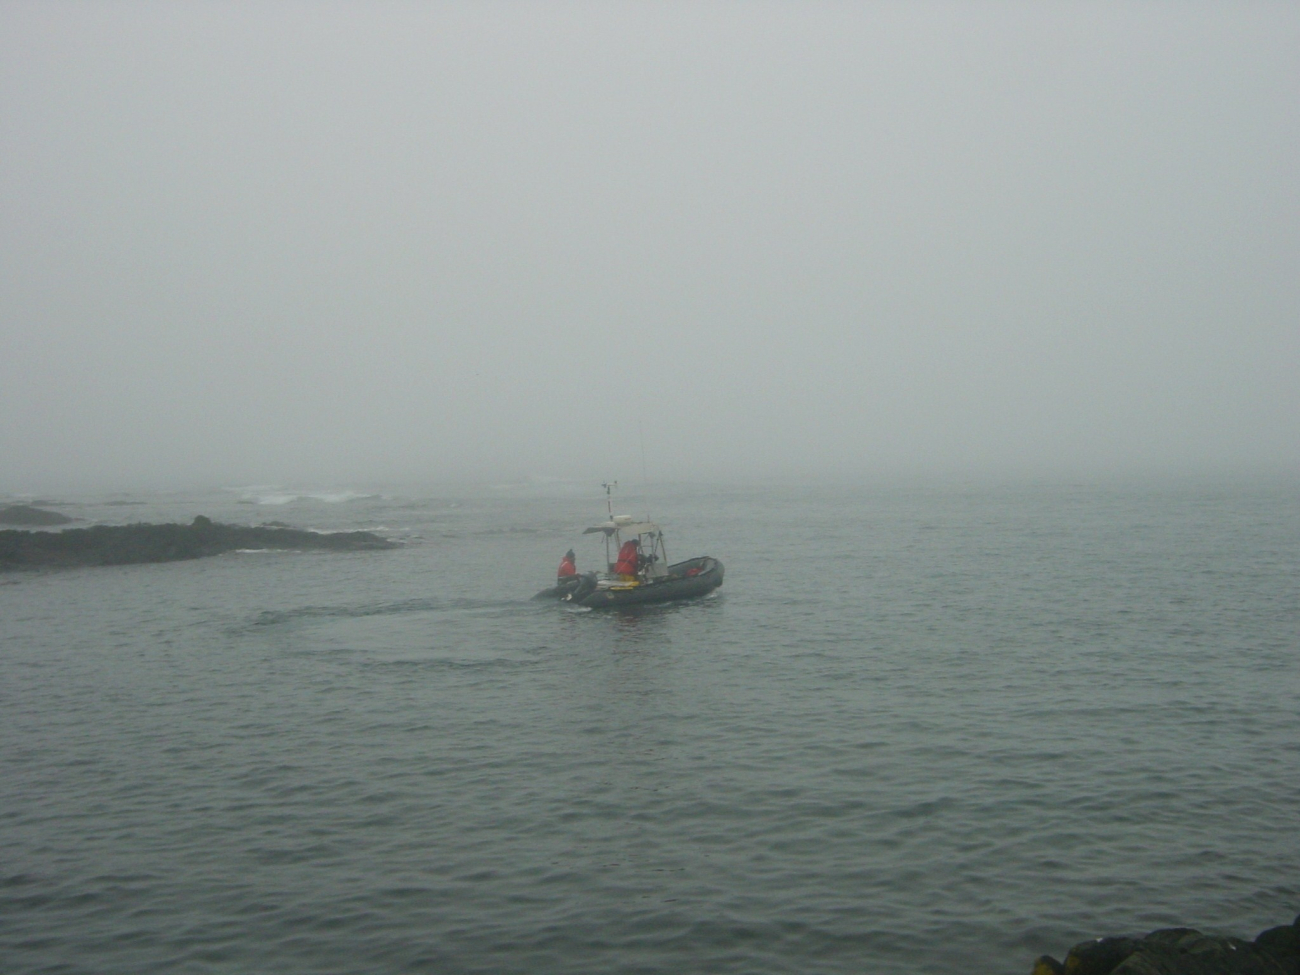 Mapping team going to work on foggy grey day